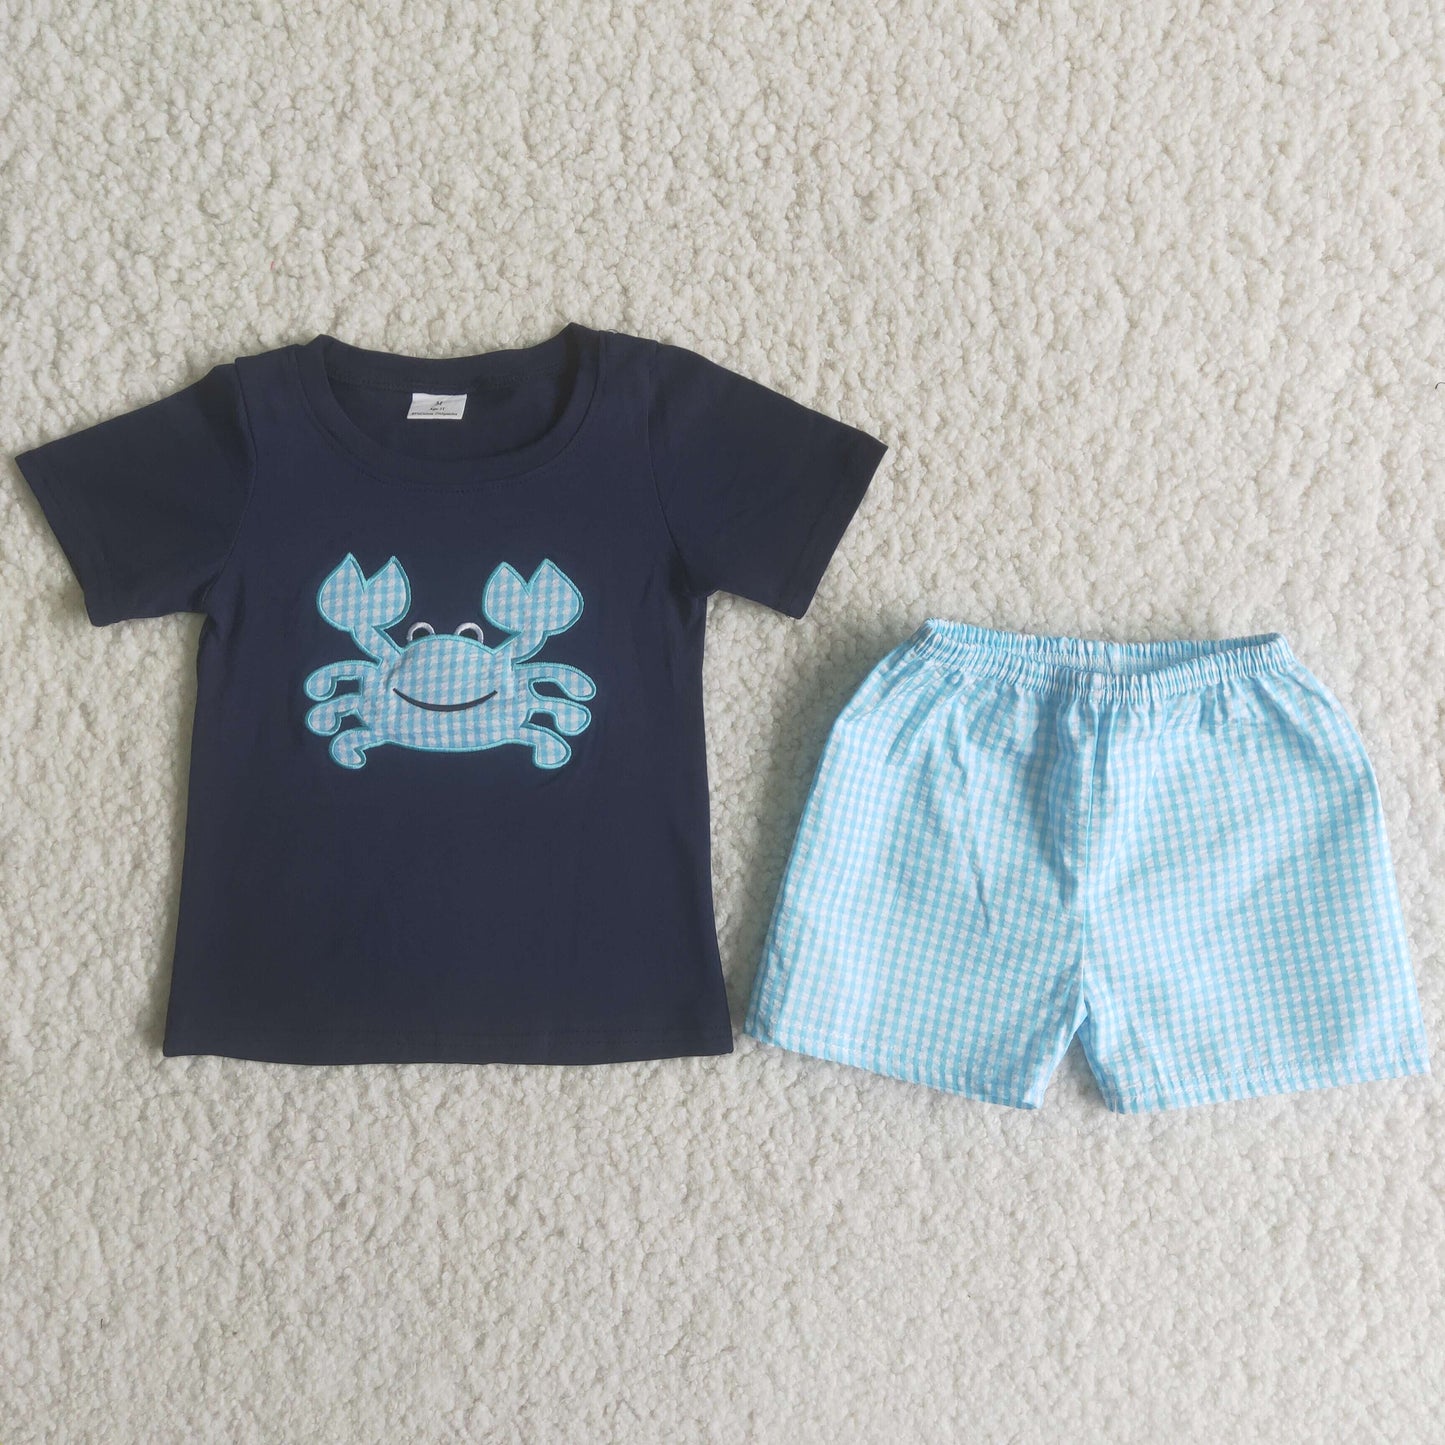 Boy Crab Embroidery Plaid Outfit: 3T